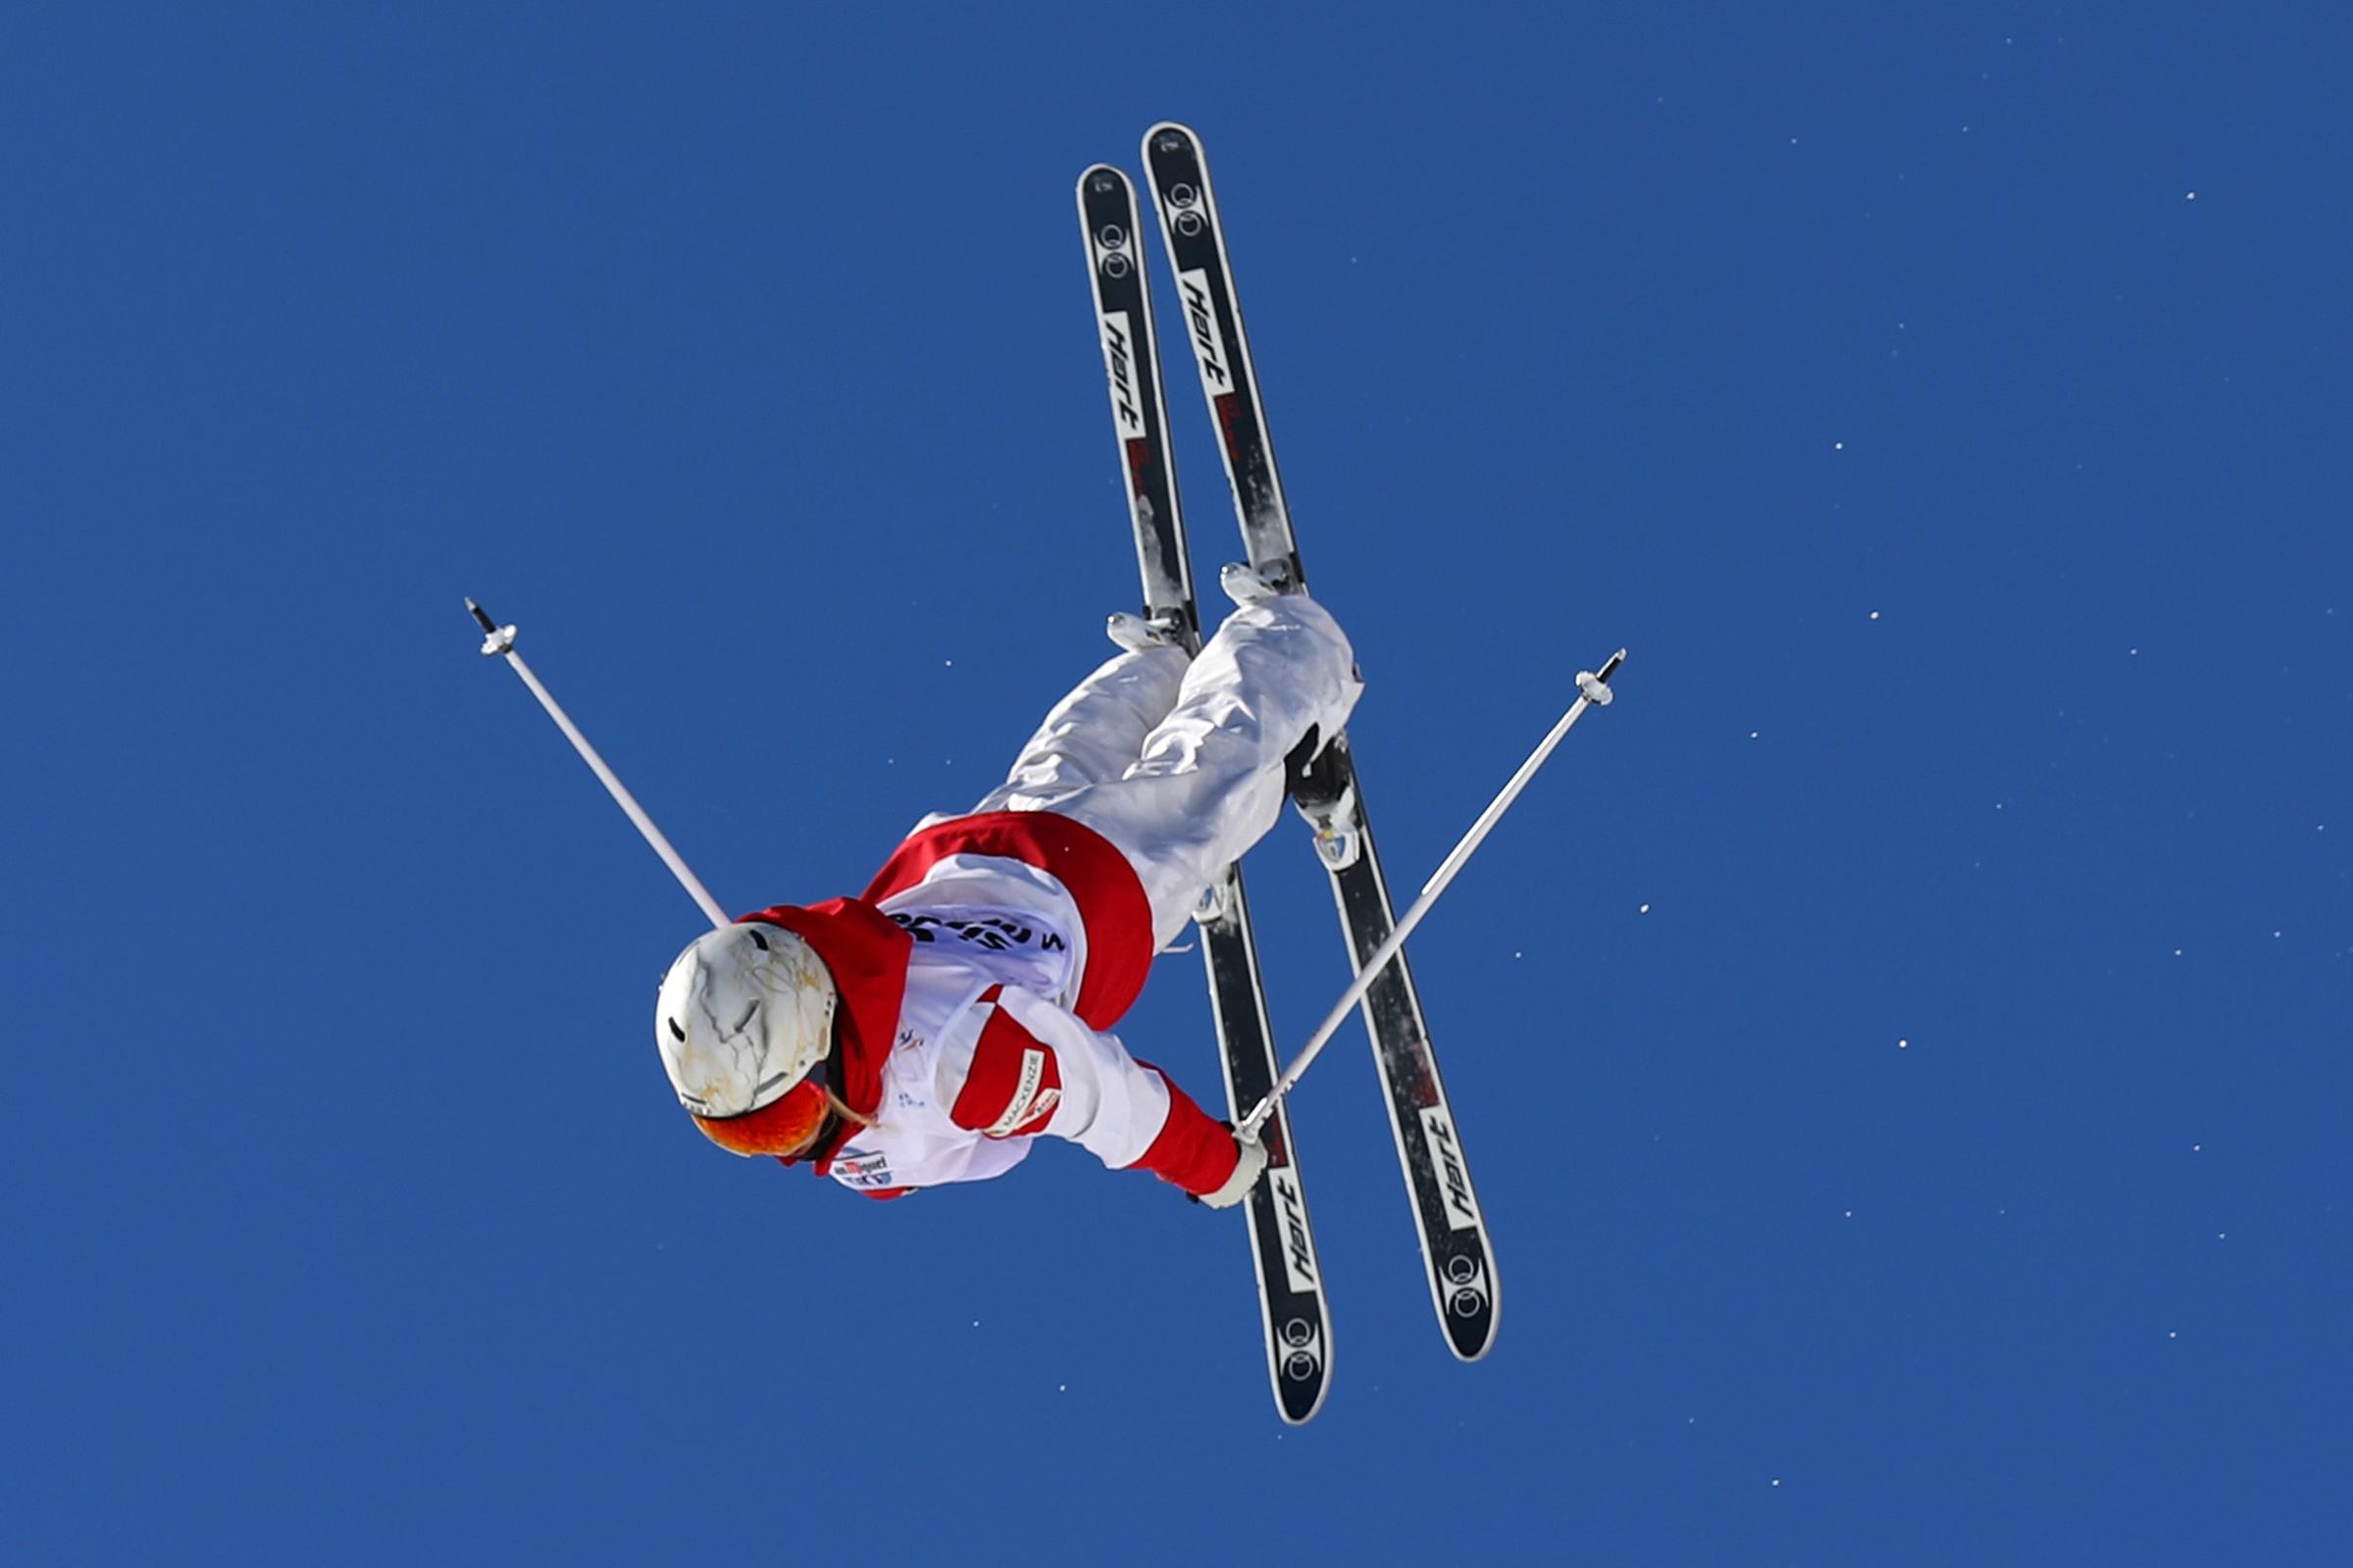 Justine Dufour-Lapointe of Canada competes in the Women's Moguls qualification at the FIS Freestyle Ski & Snowboard World Championships in Sierra Nevada, Spain, on March 8, 2017.